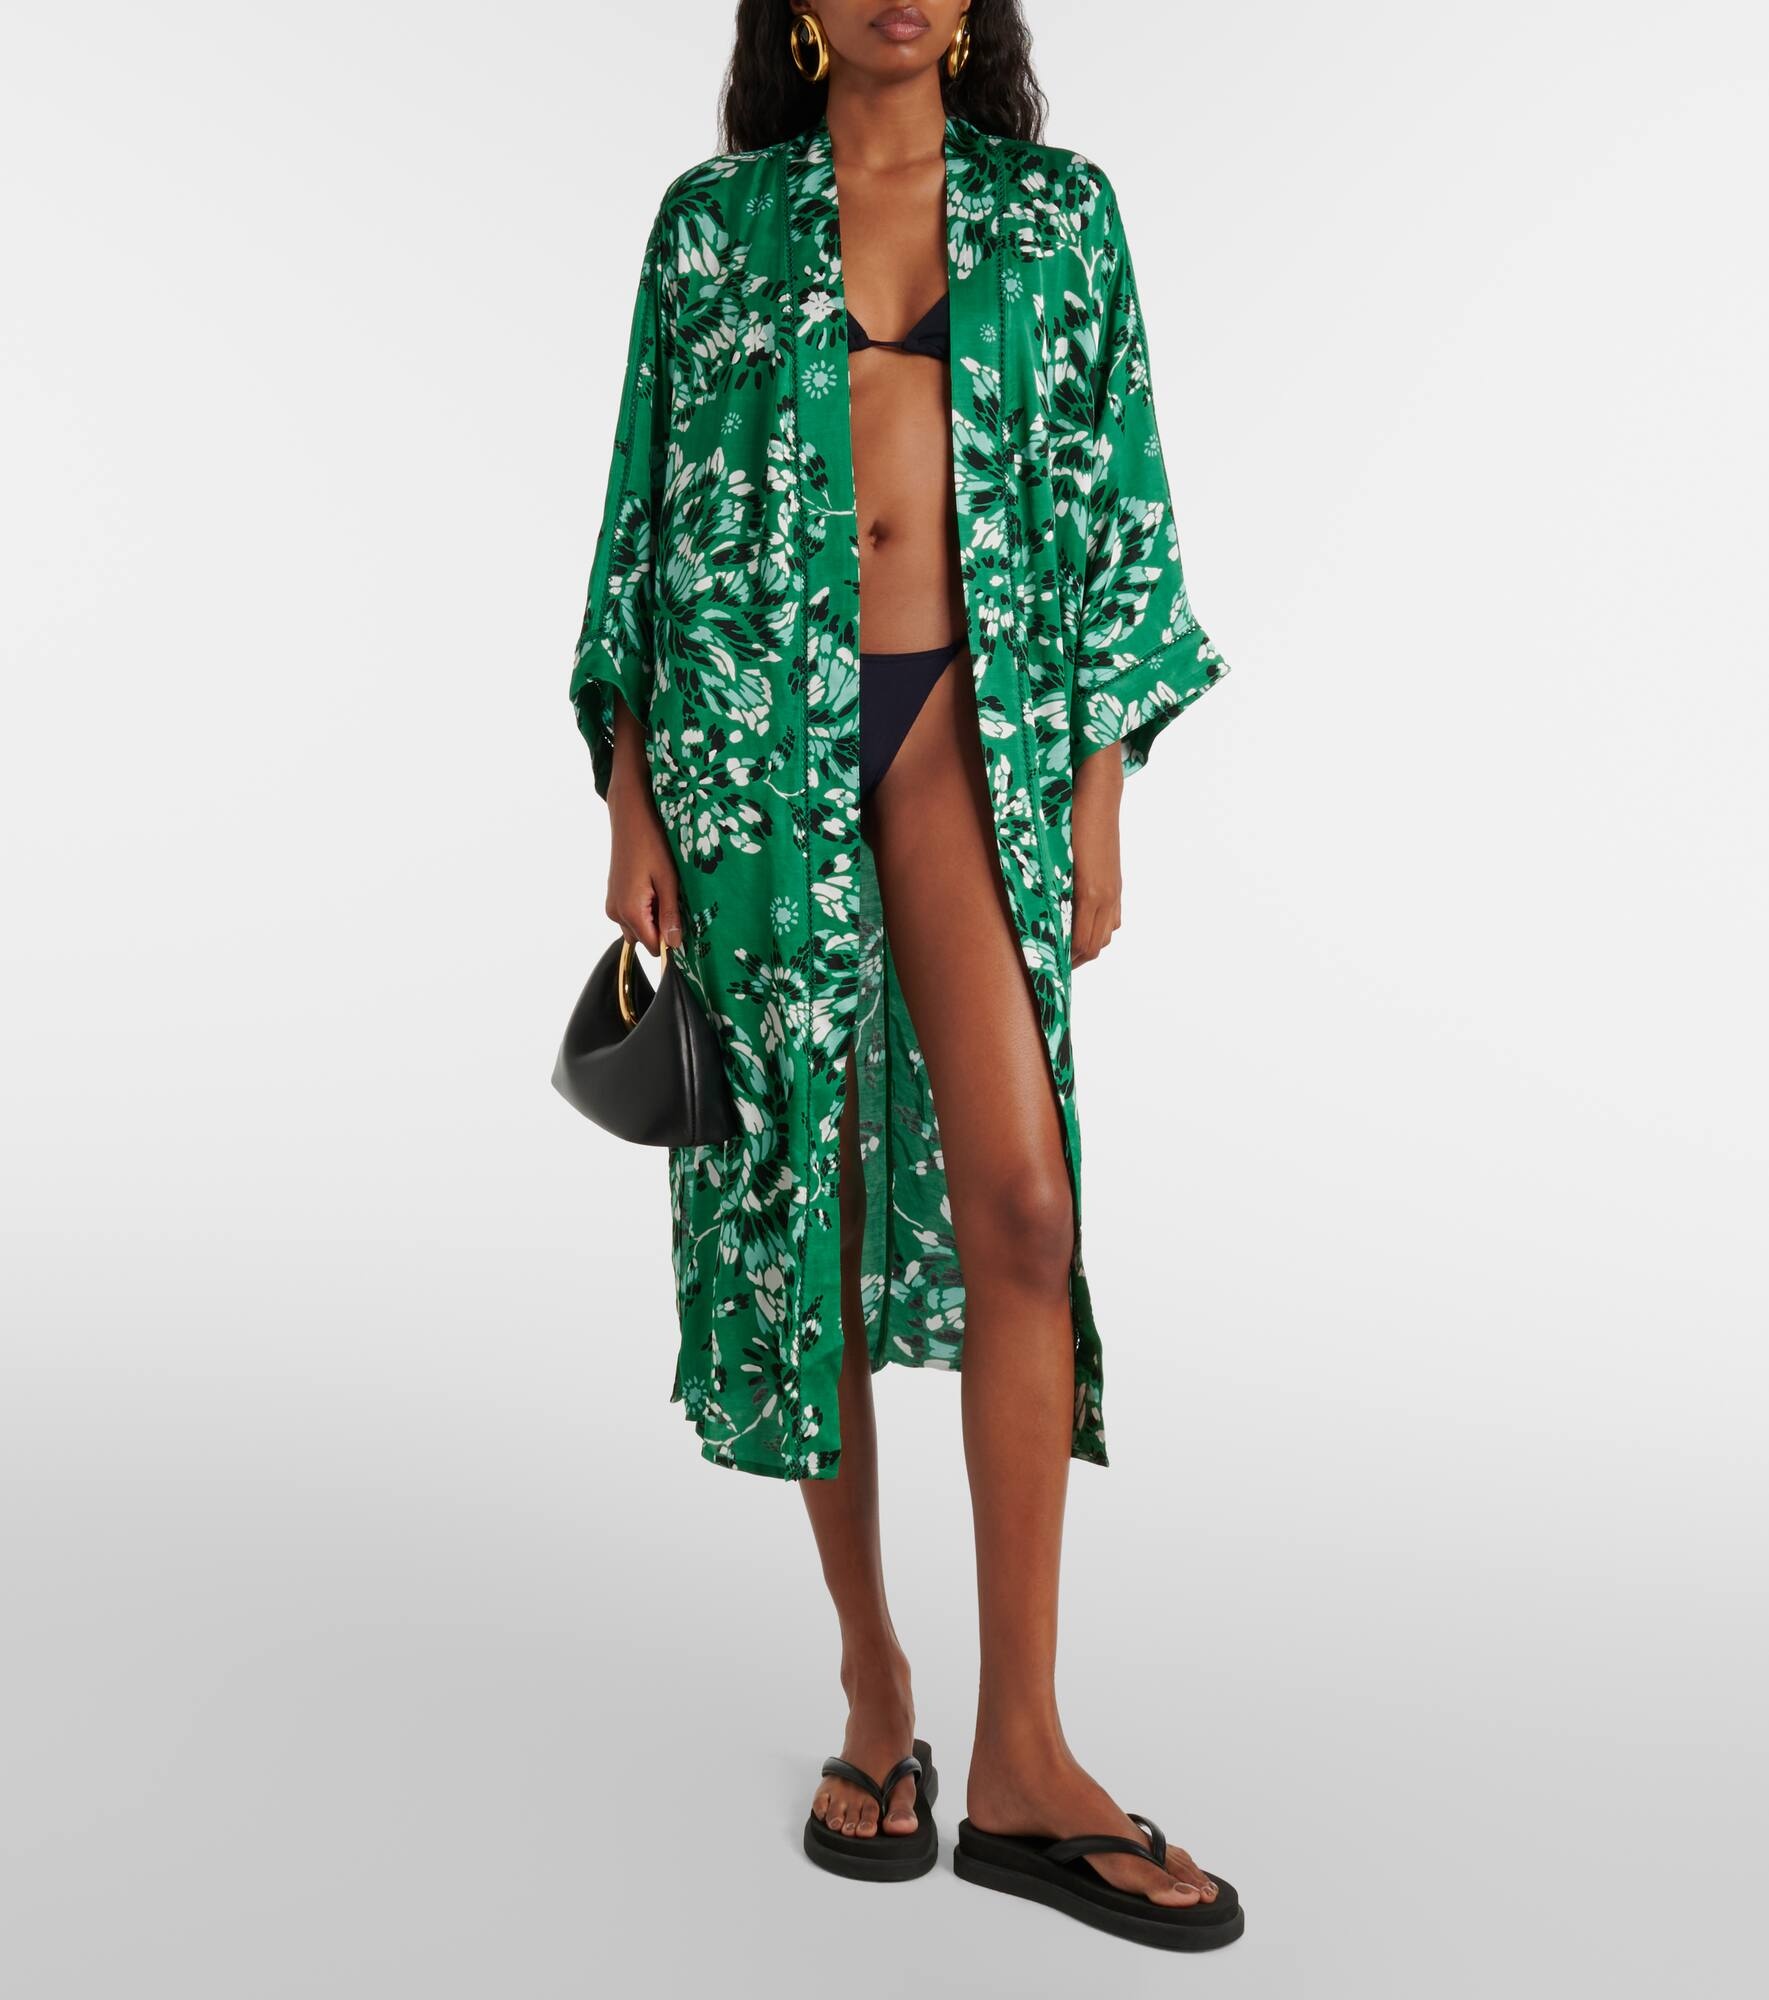 Erica floral beach cover-up - 2